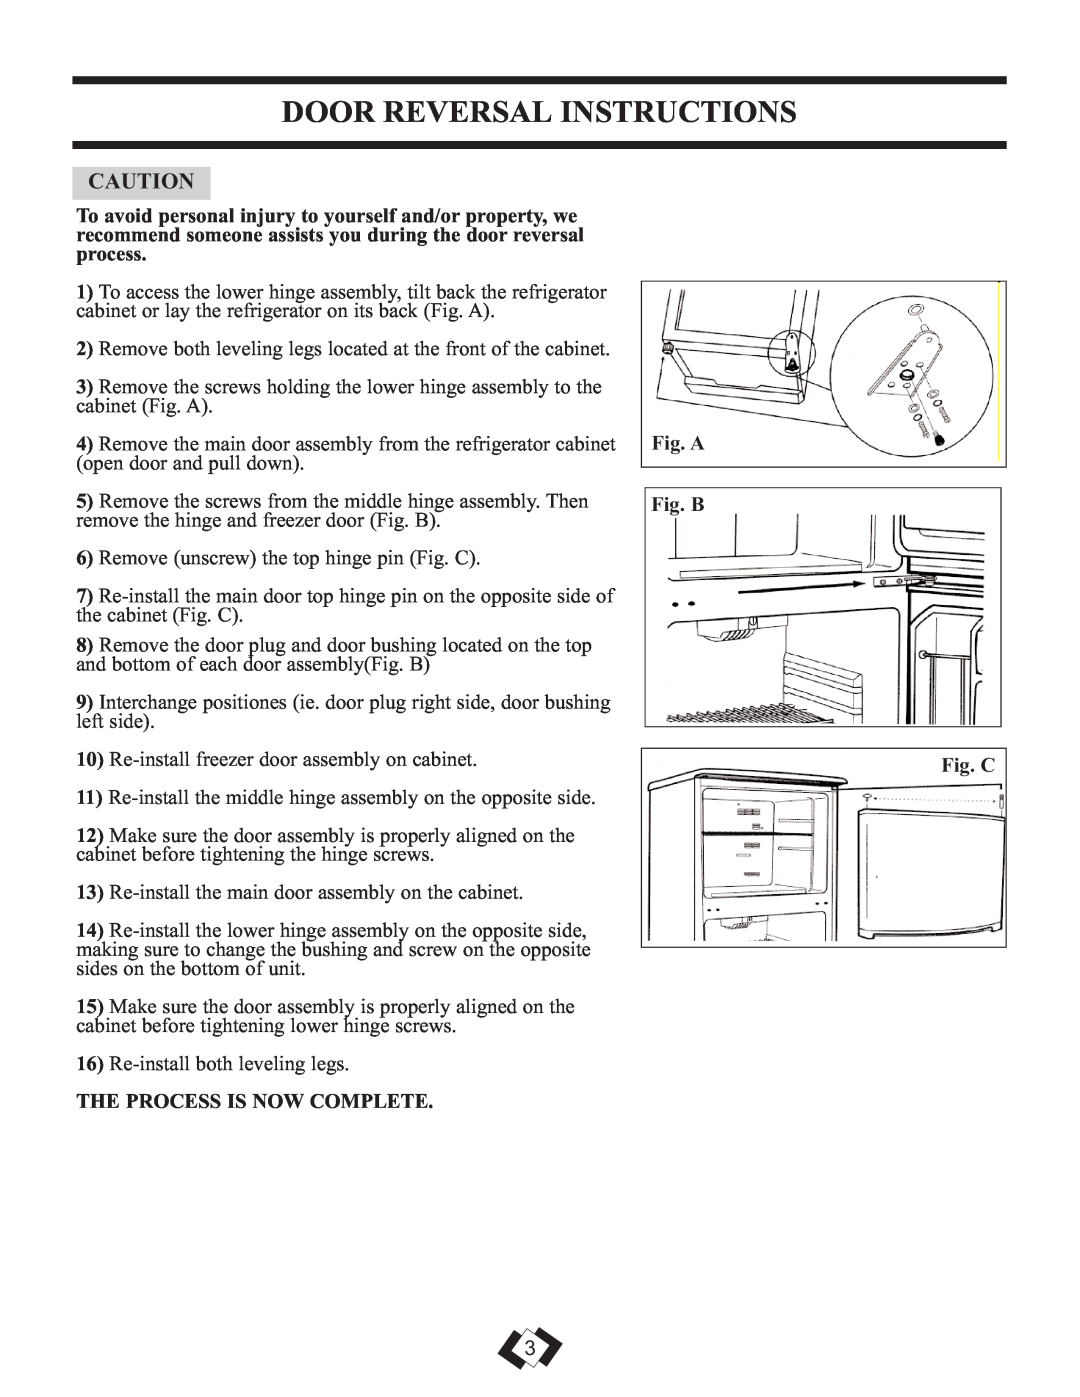 Sunbeam DFF258WSB installation instructions Door Reversal Instructions, The Process Is Now Complete, Fig. A Fig. B Fig. C 